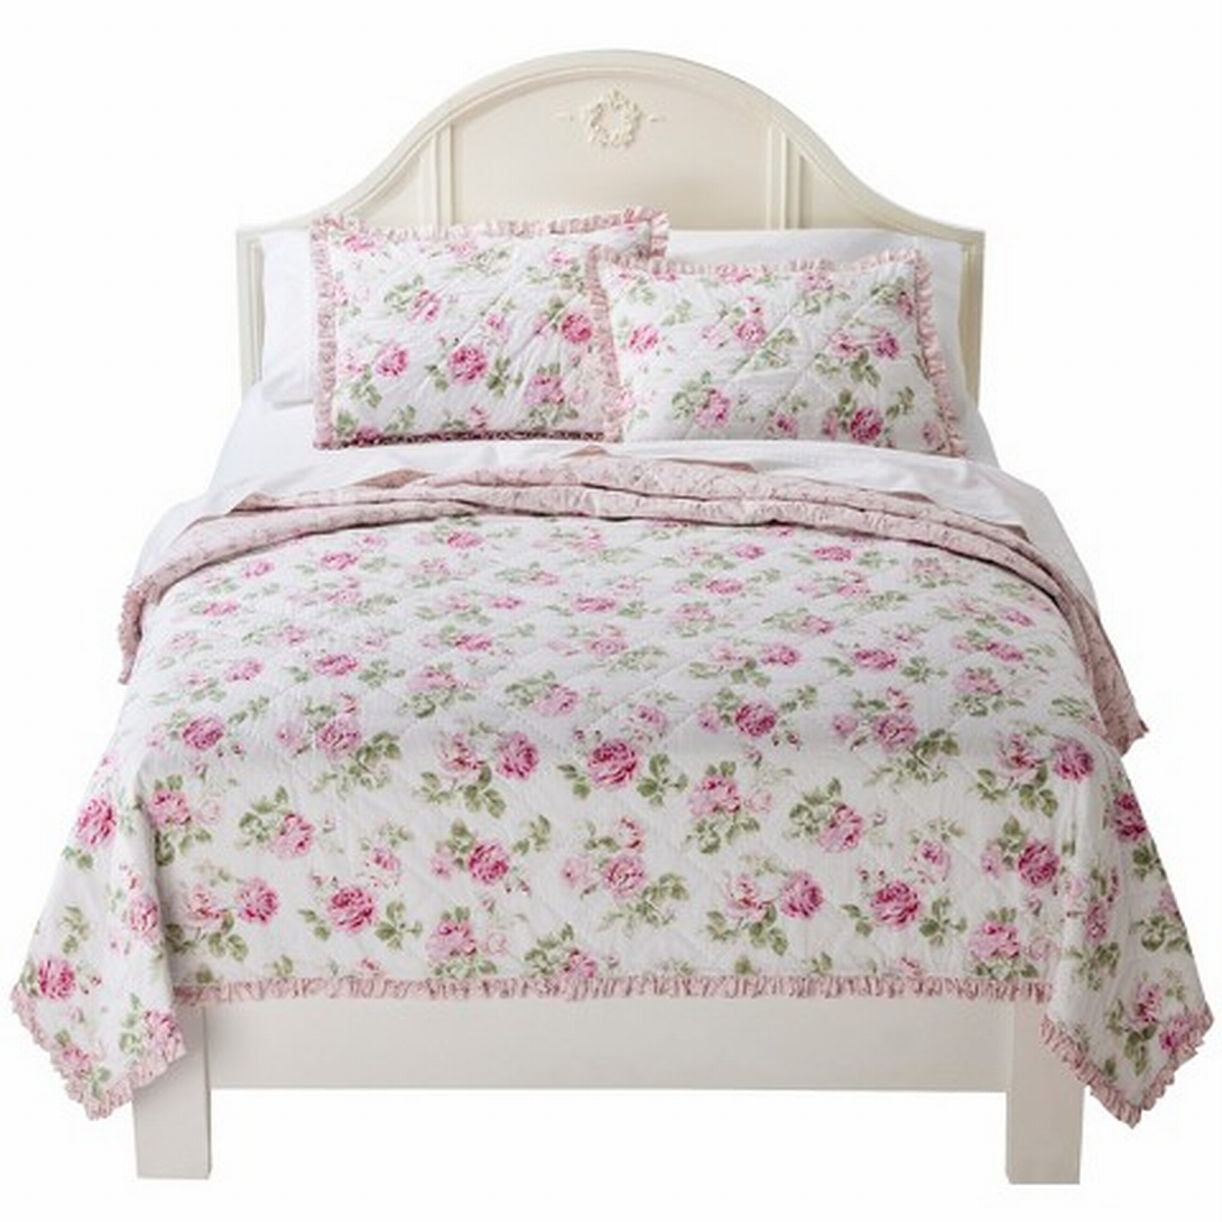 Simply Shabby Chic Pretty Pink Garden Rose Twin Bed Floral Quilt